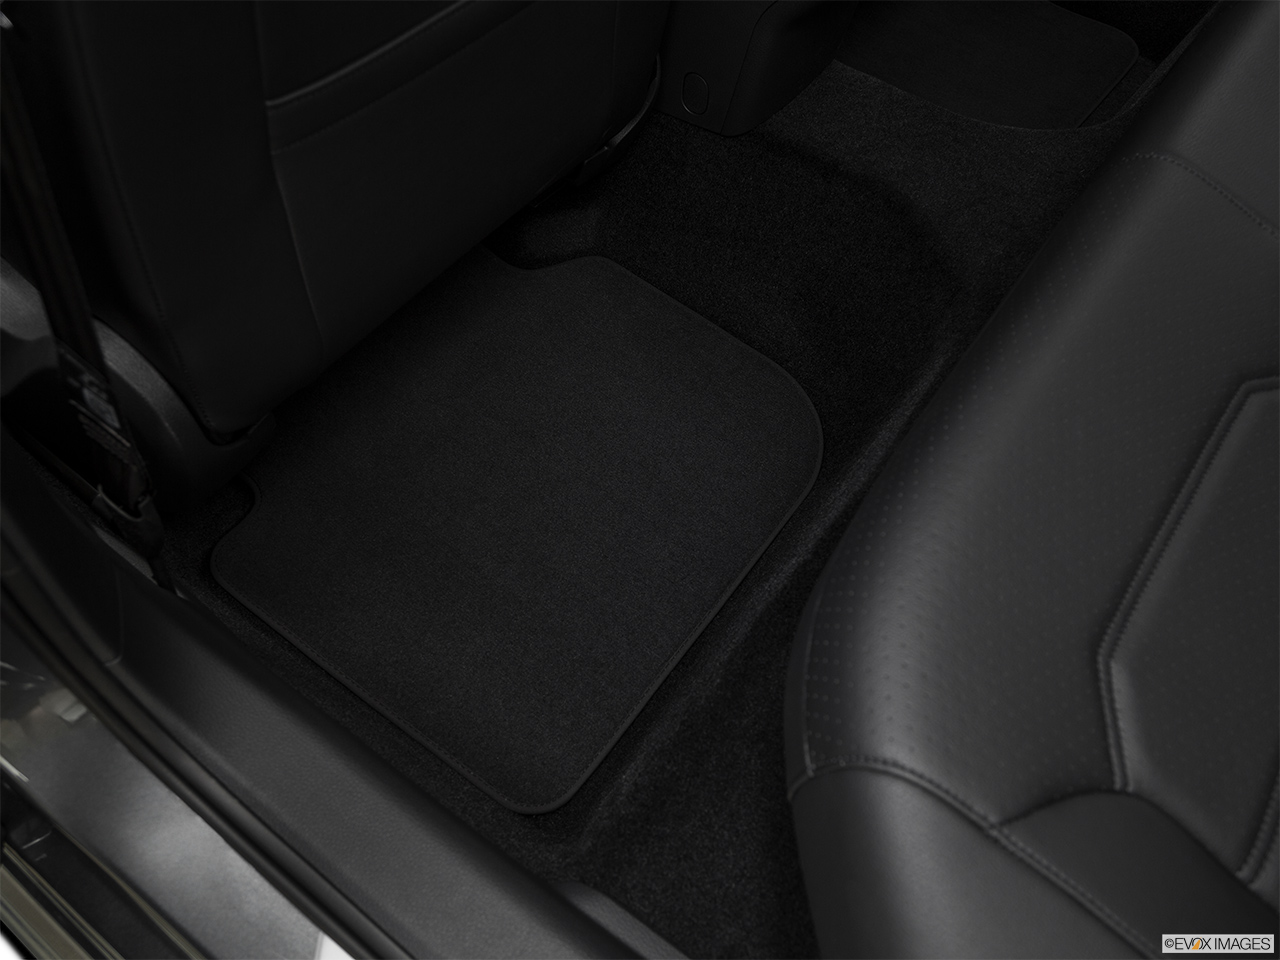 2018 Volkswagen Passat R-Line Rear driver's side floor mat. Mid-seat level from outside looking in. 